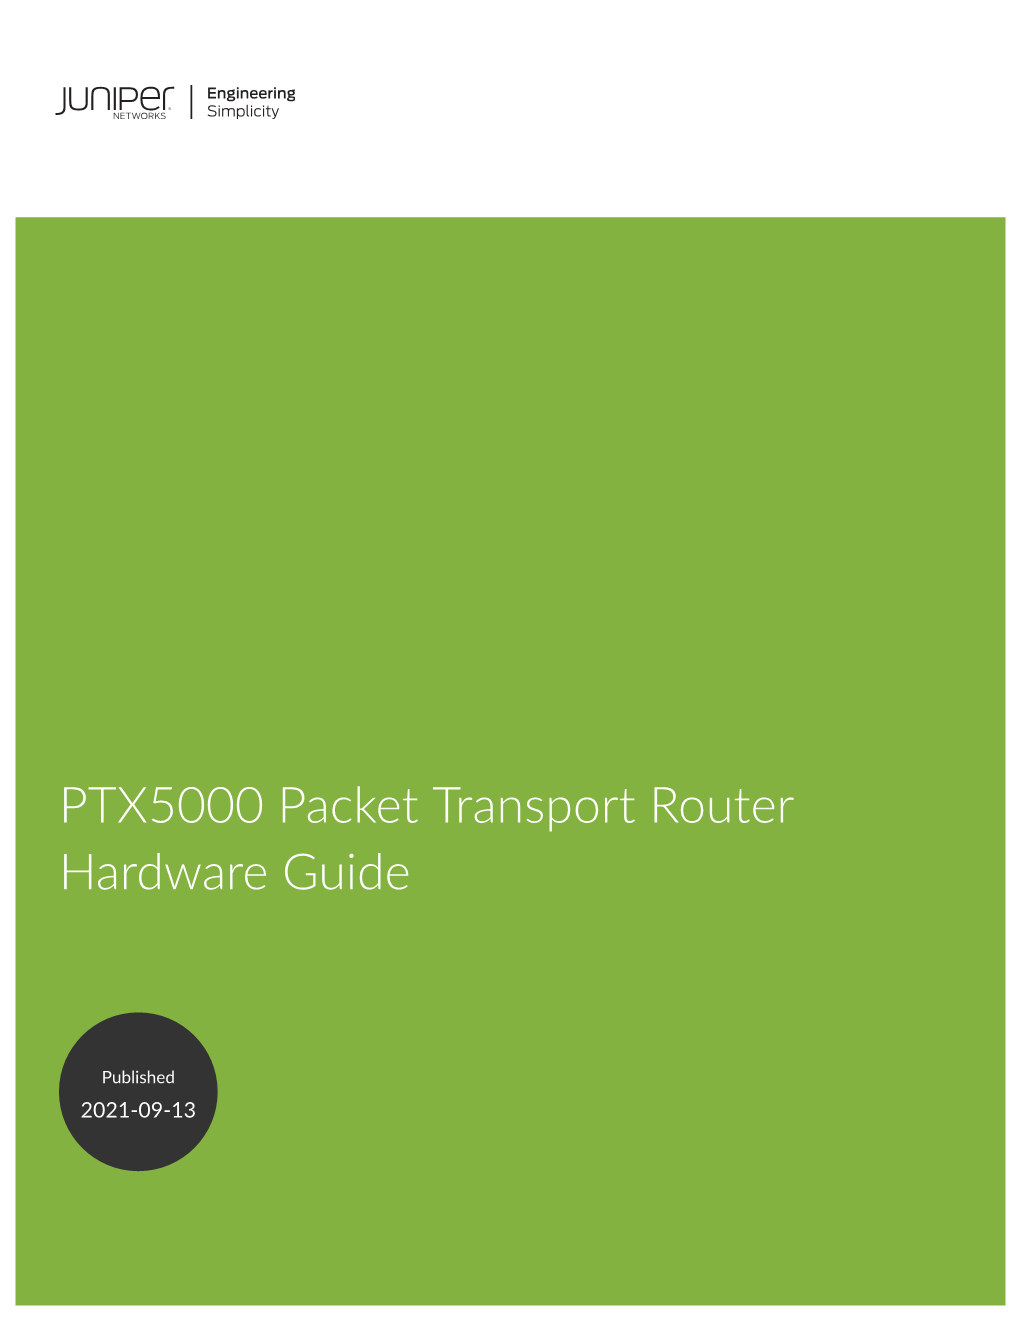 PTX5000 Packet Transport Router Hardware Guide